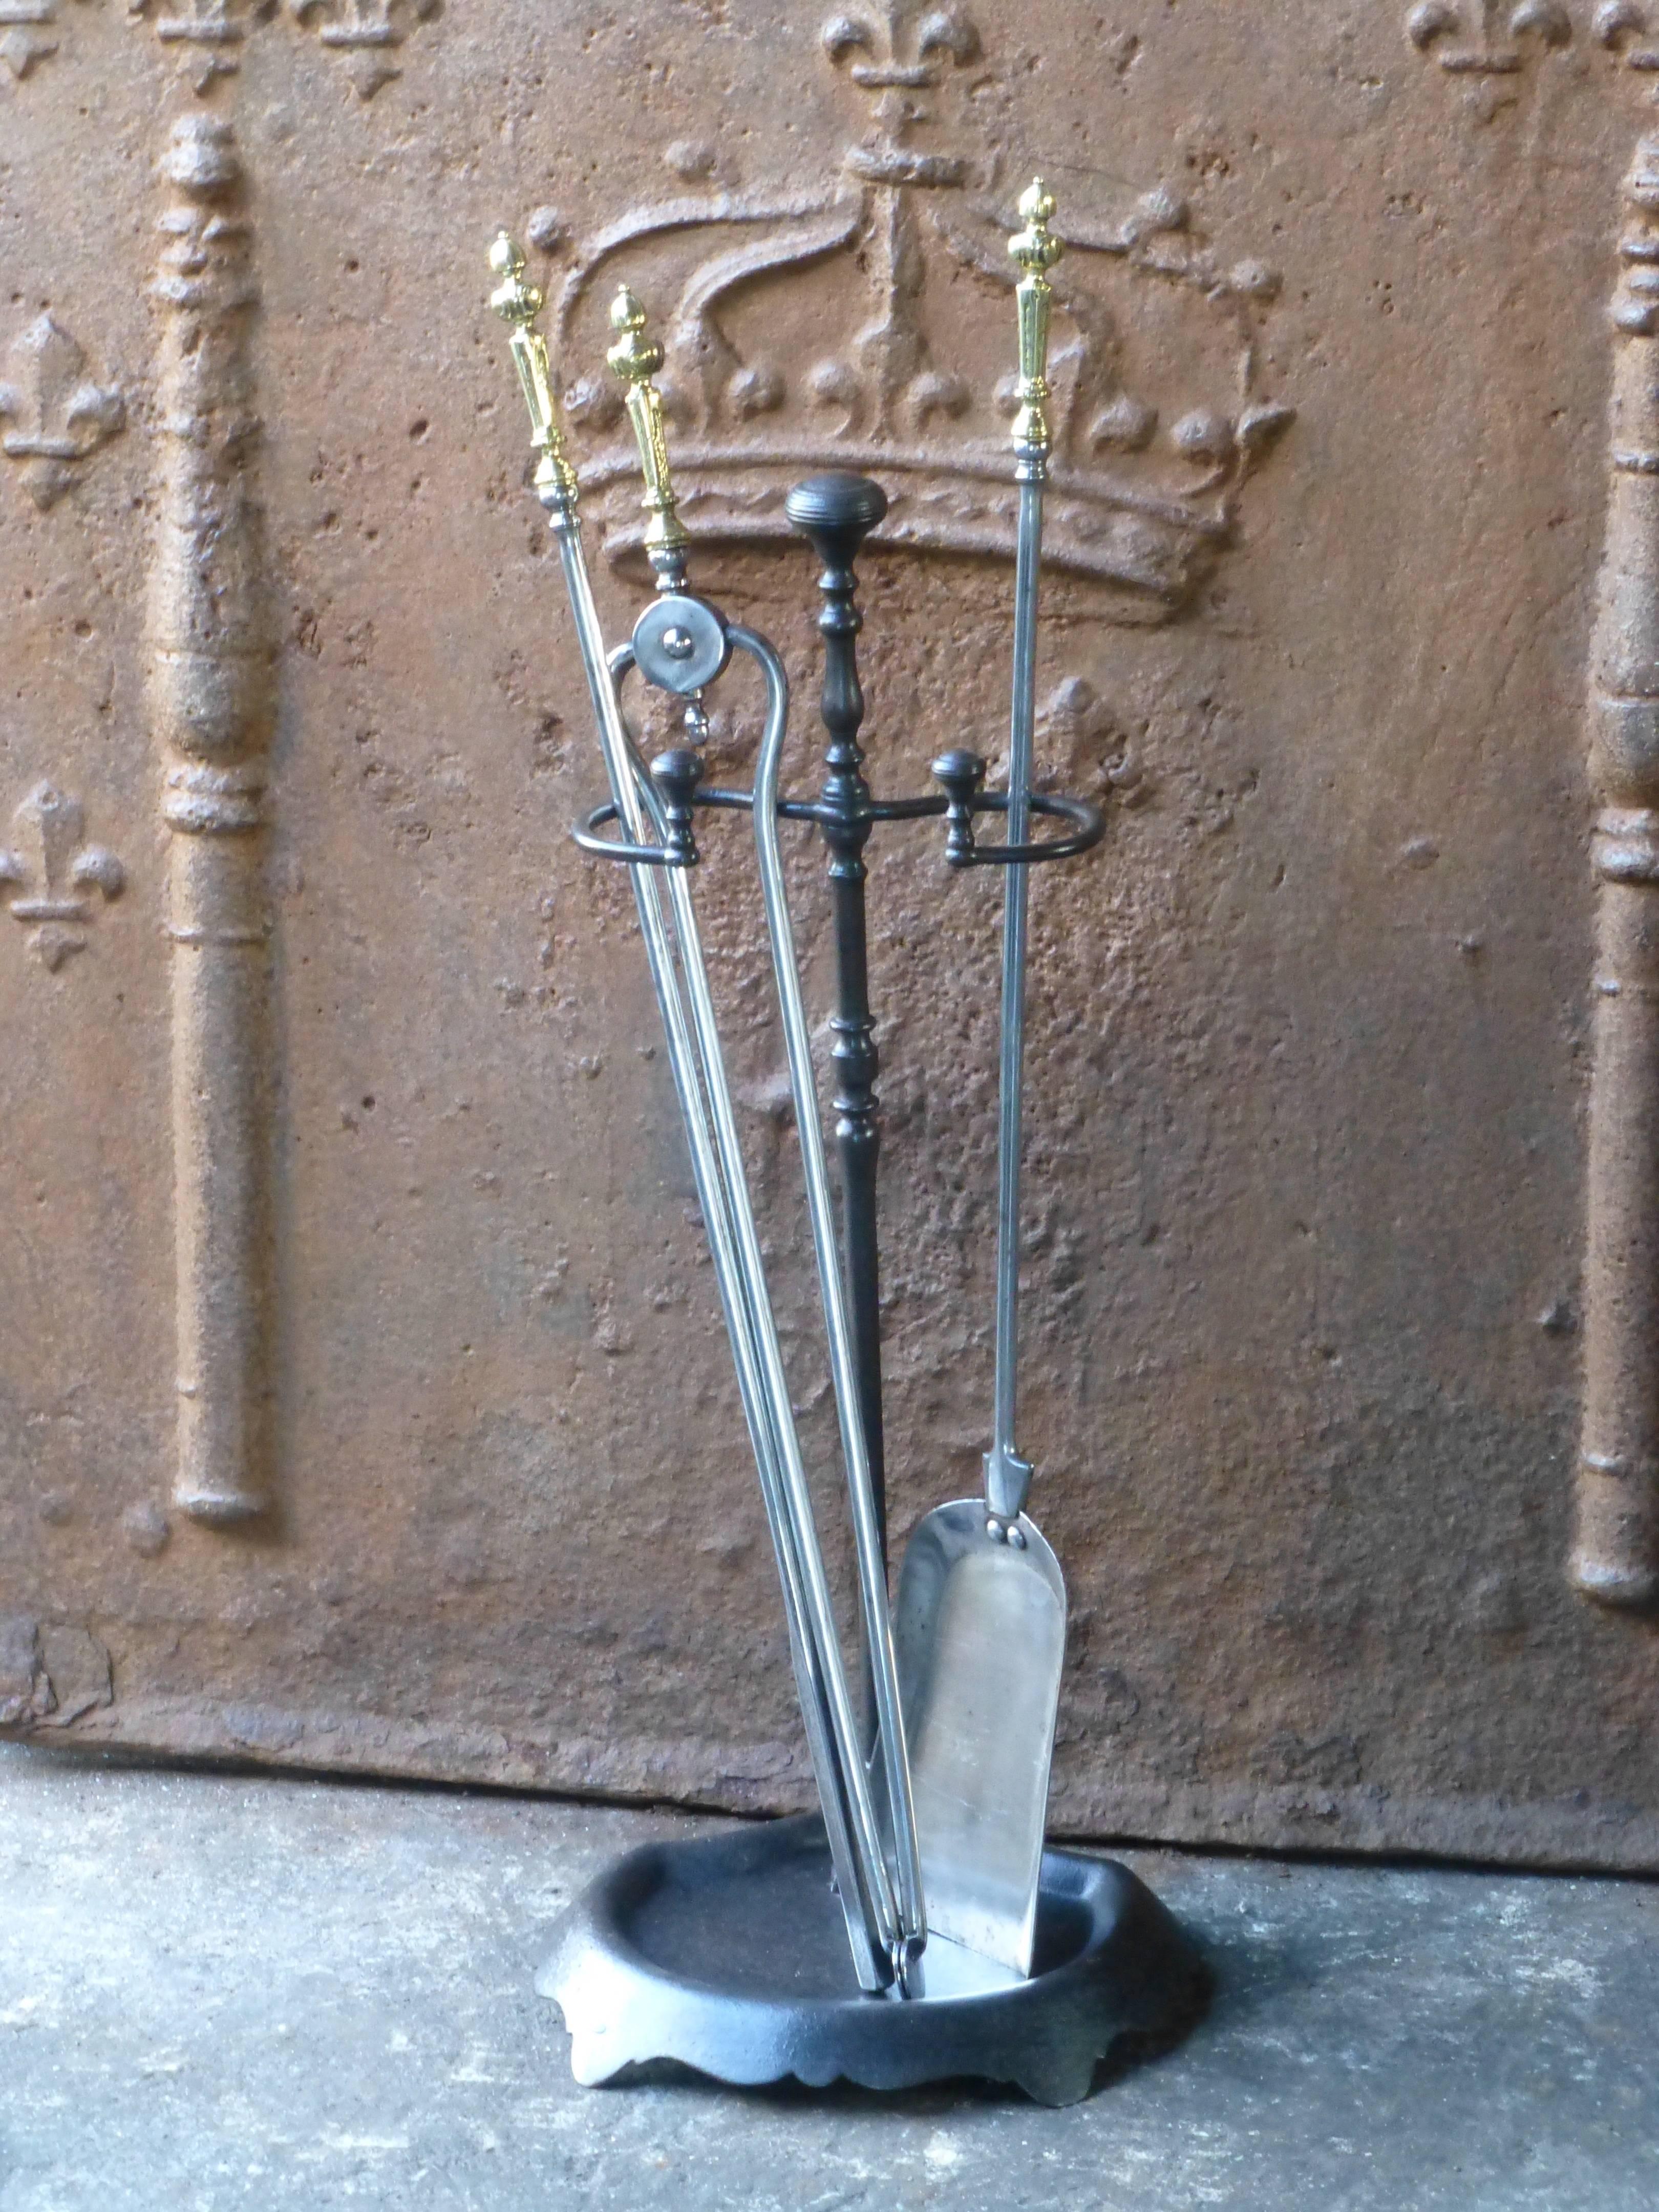 19th century English fireplace toolset made of wrought iron, polished steel and polished brass. Victorian period. The condition is good.

